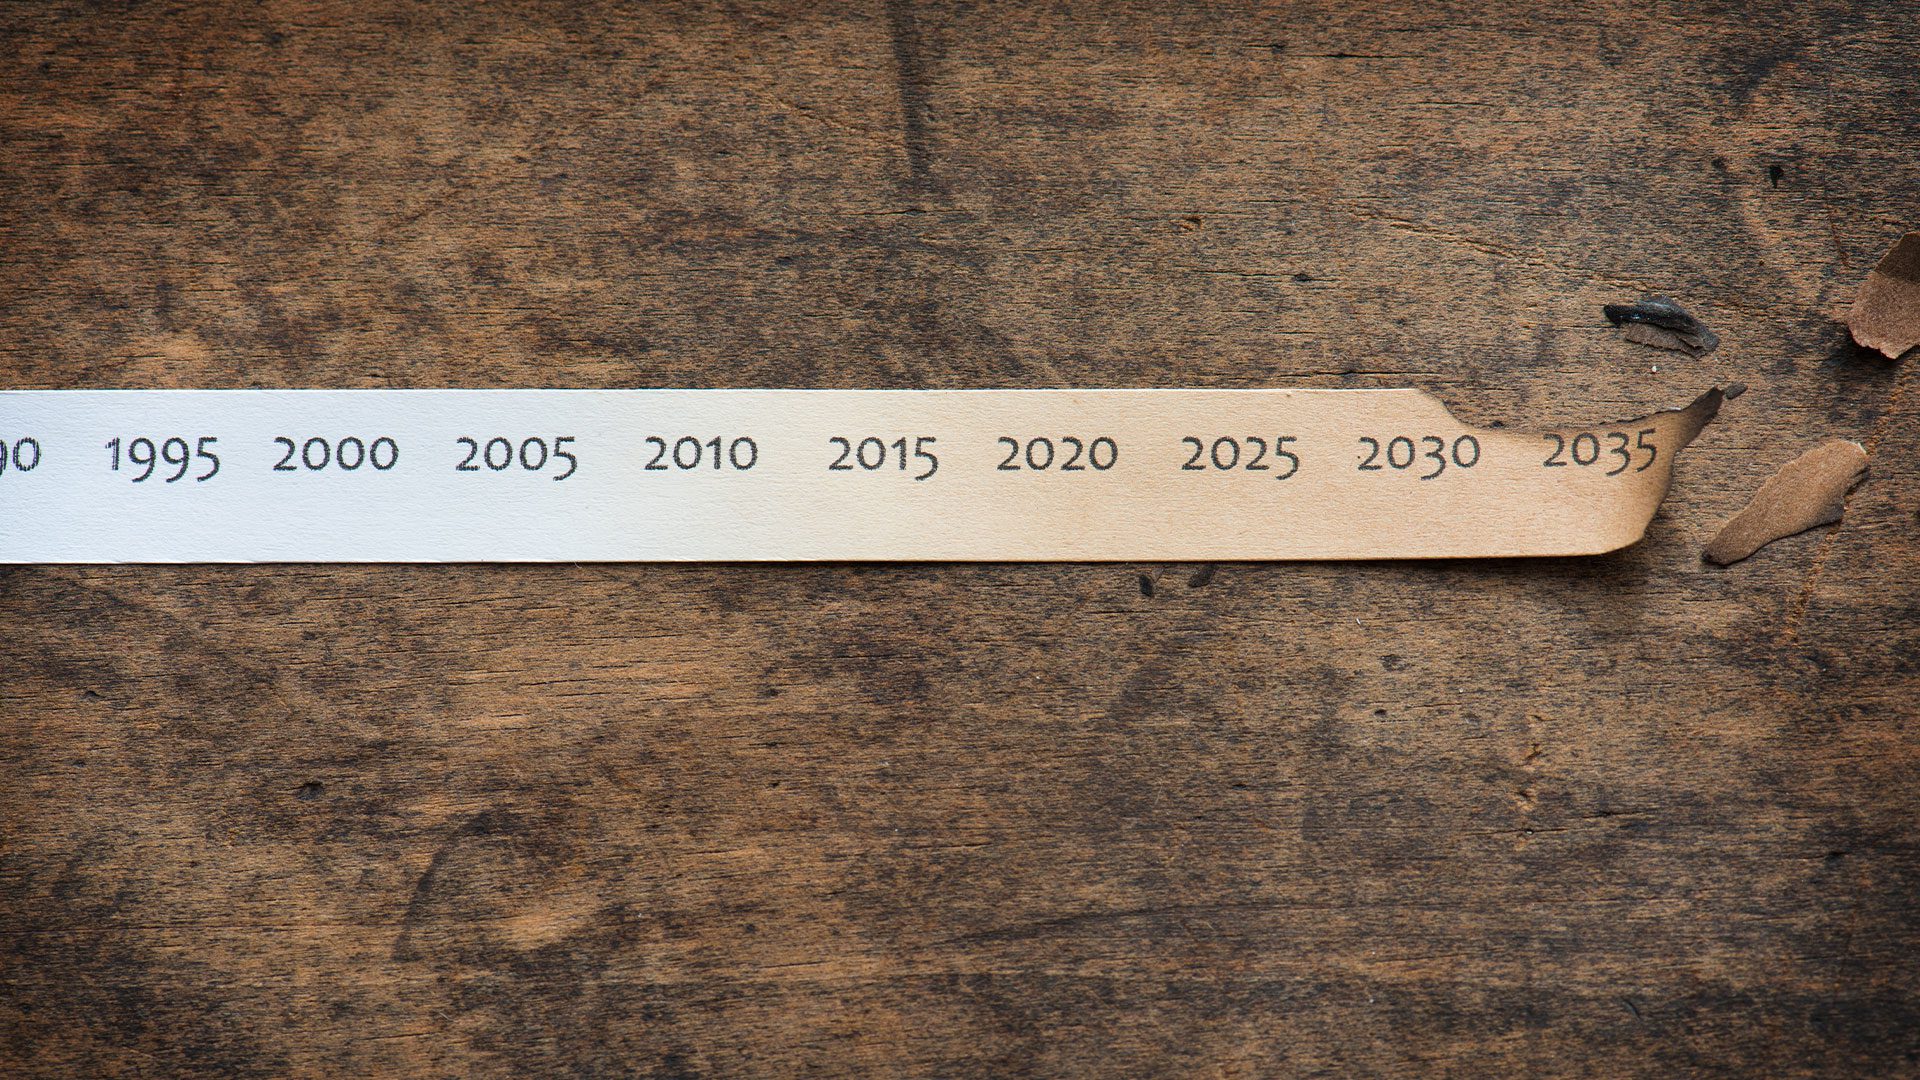 A paper strip with years from 1995 to 2035